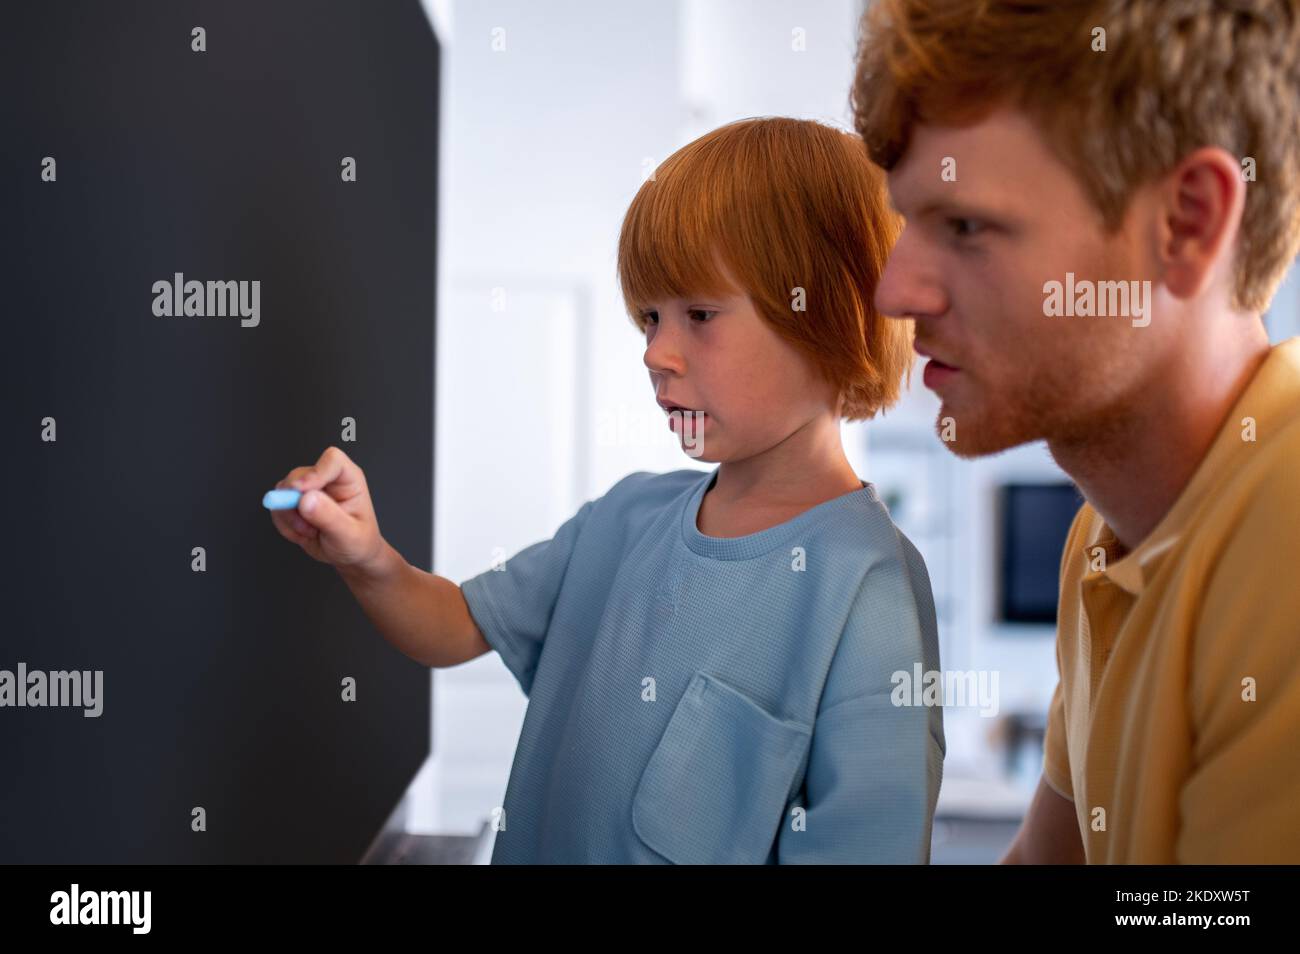 Little boy standing near the blackboard and wtriting something Stock Photo